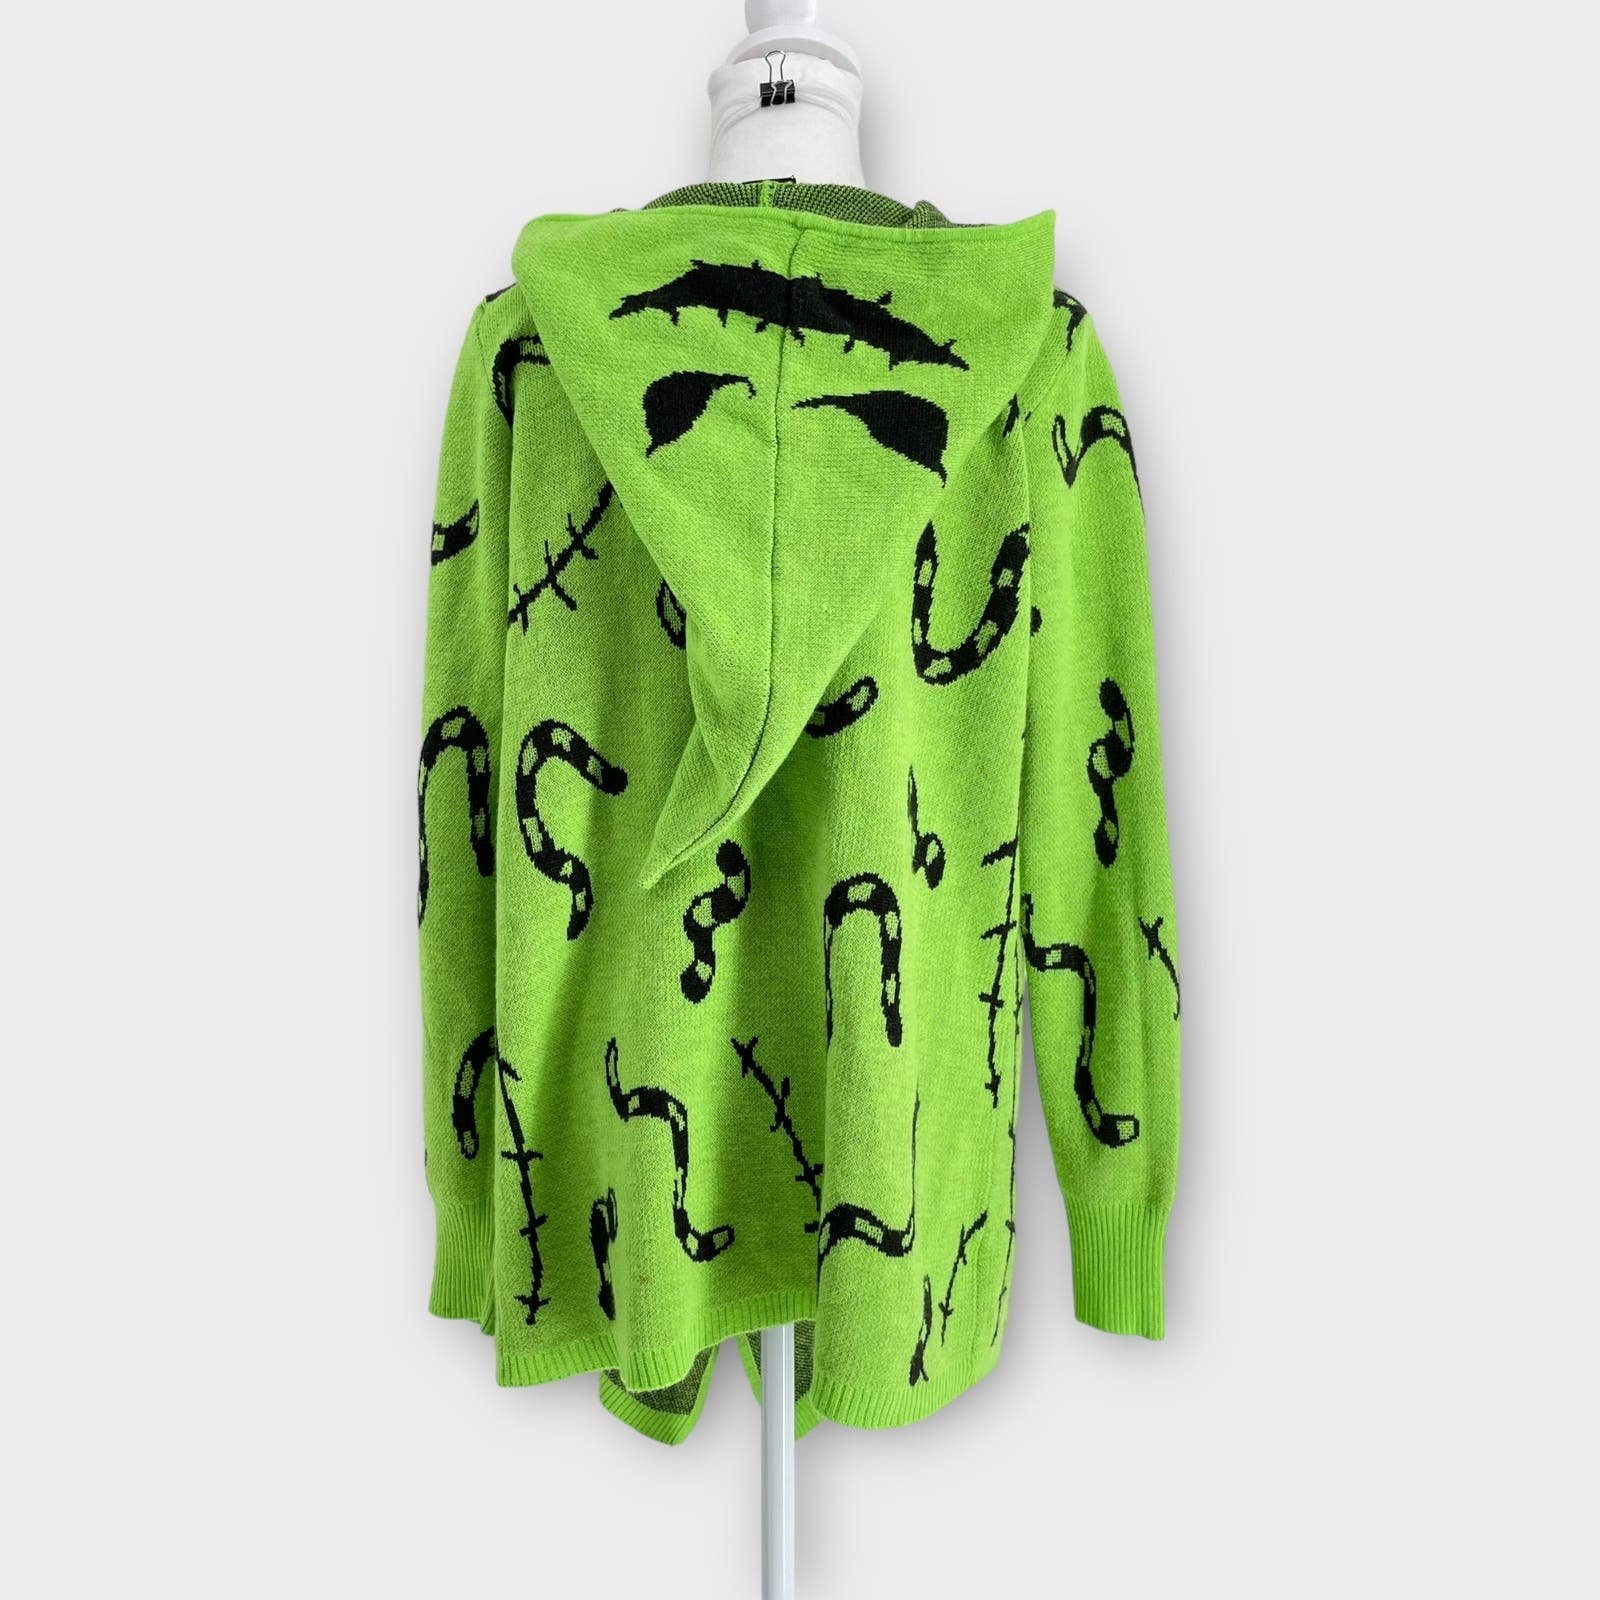 Elegant Disney Her Universe Green Nightmare Before Christmas Oogie Boogie Cardigan Large iuqAWCtem Outlet Store